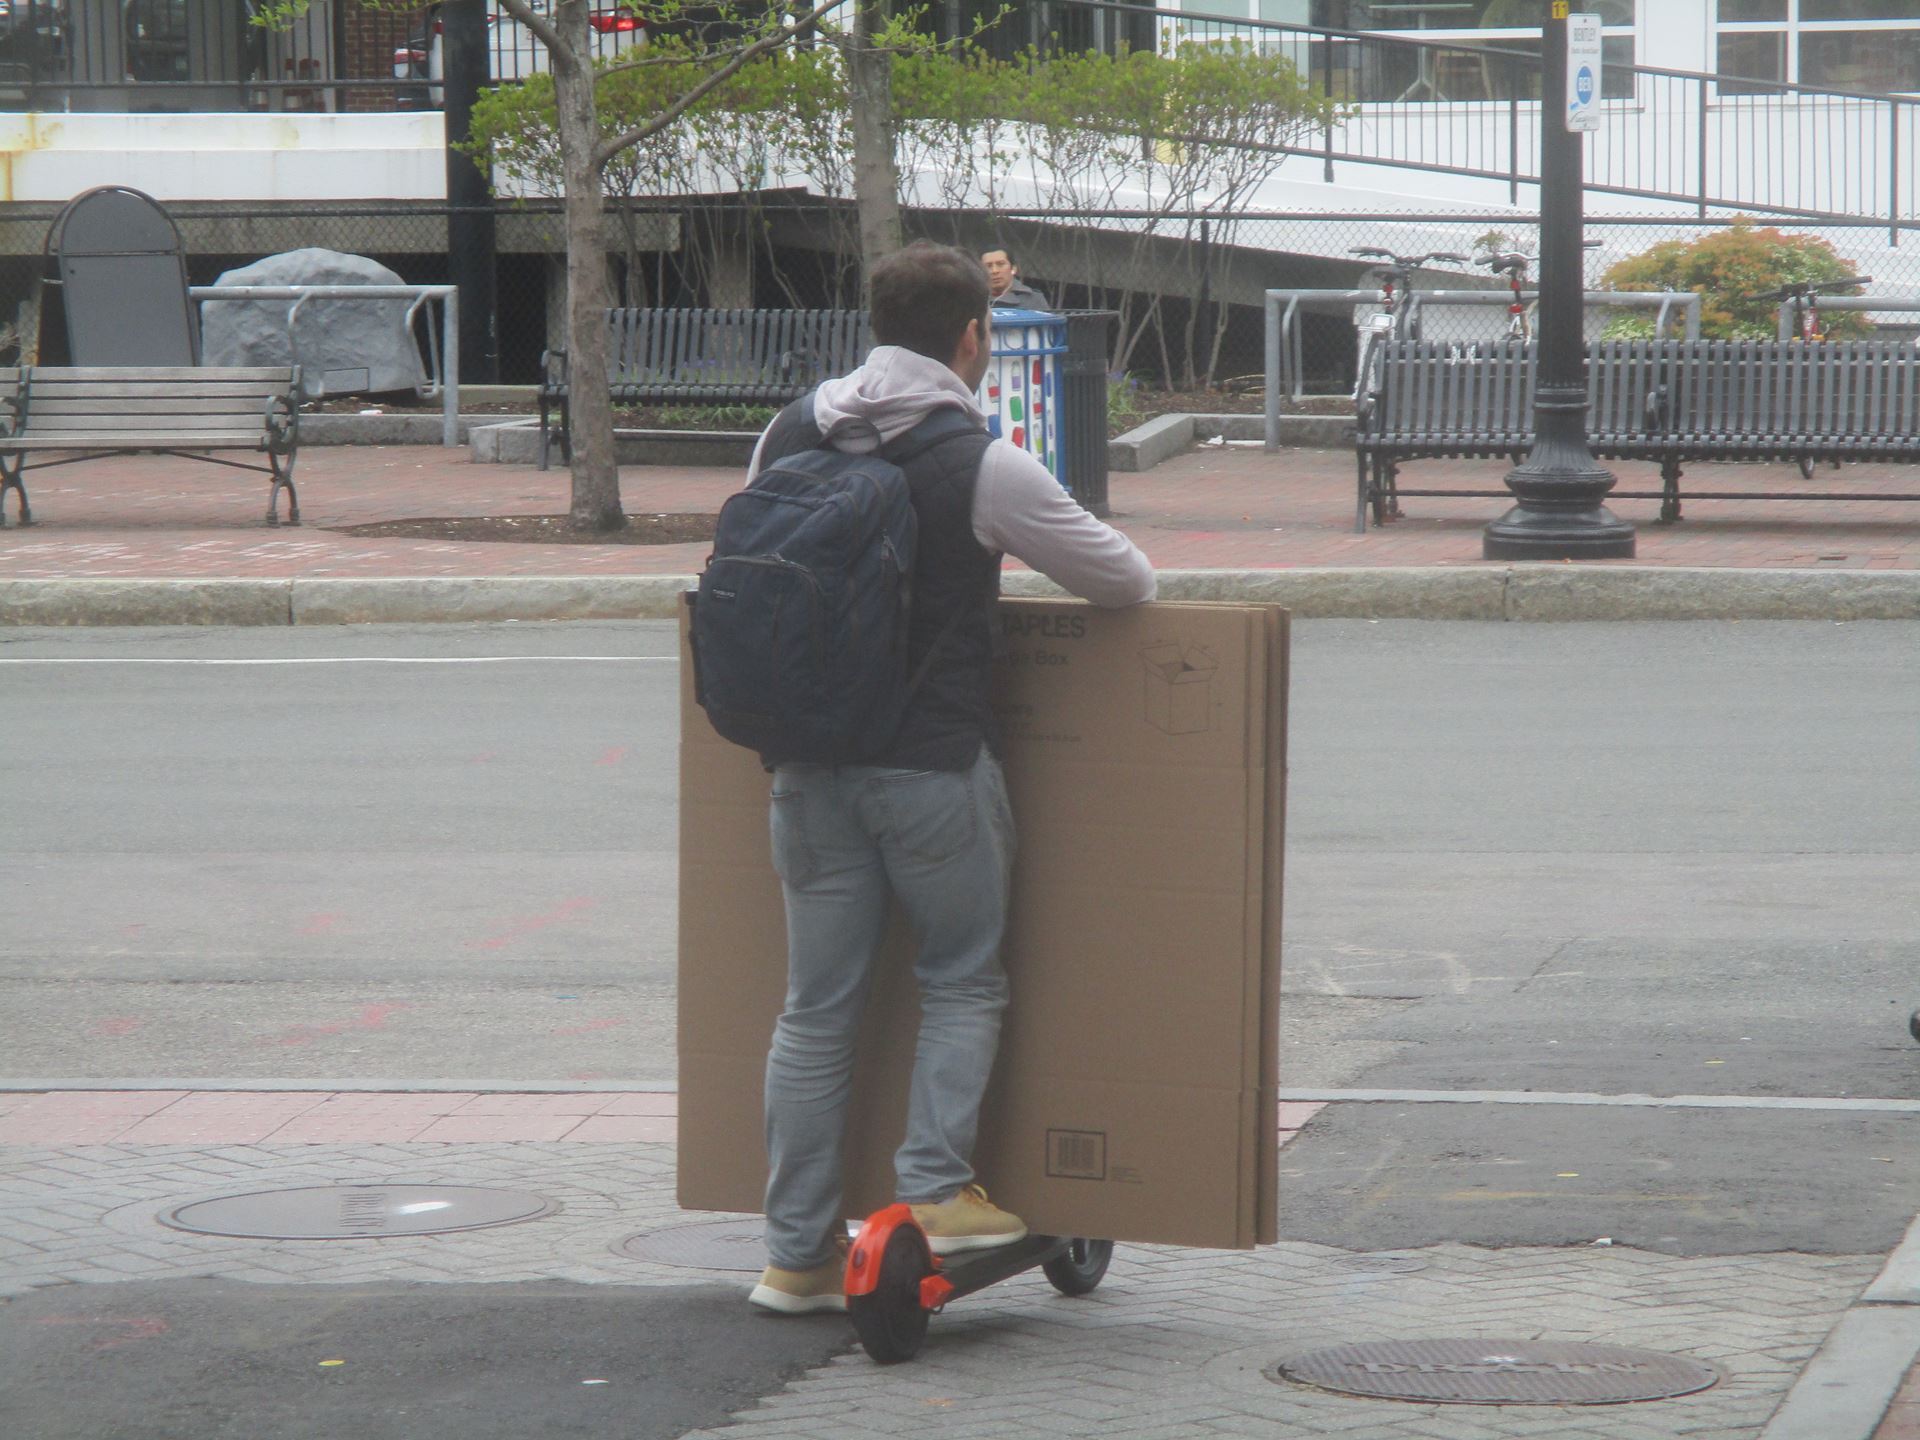 Man riding a scooter with large cardboard boxes